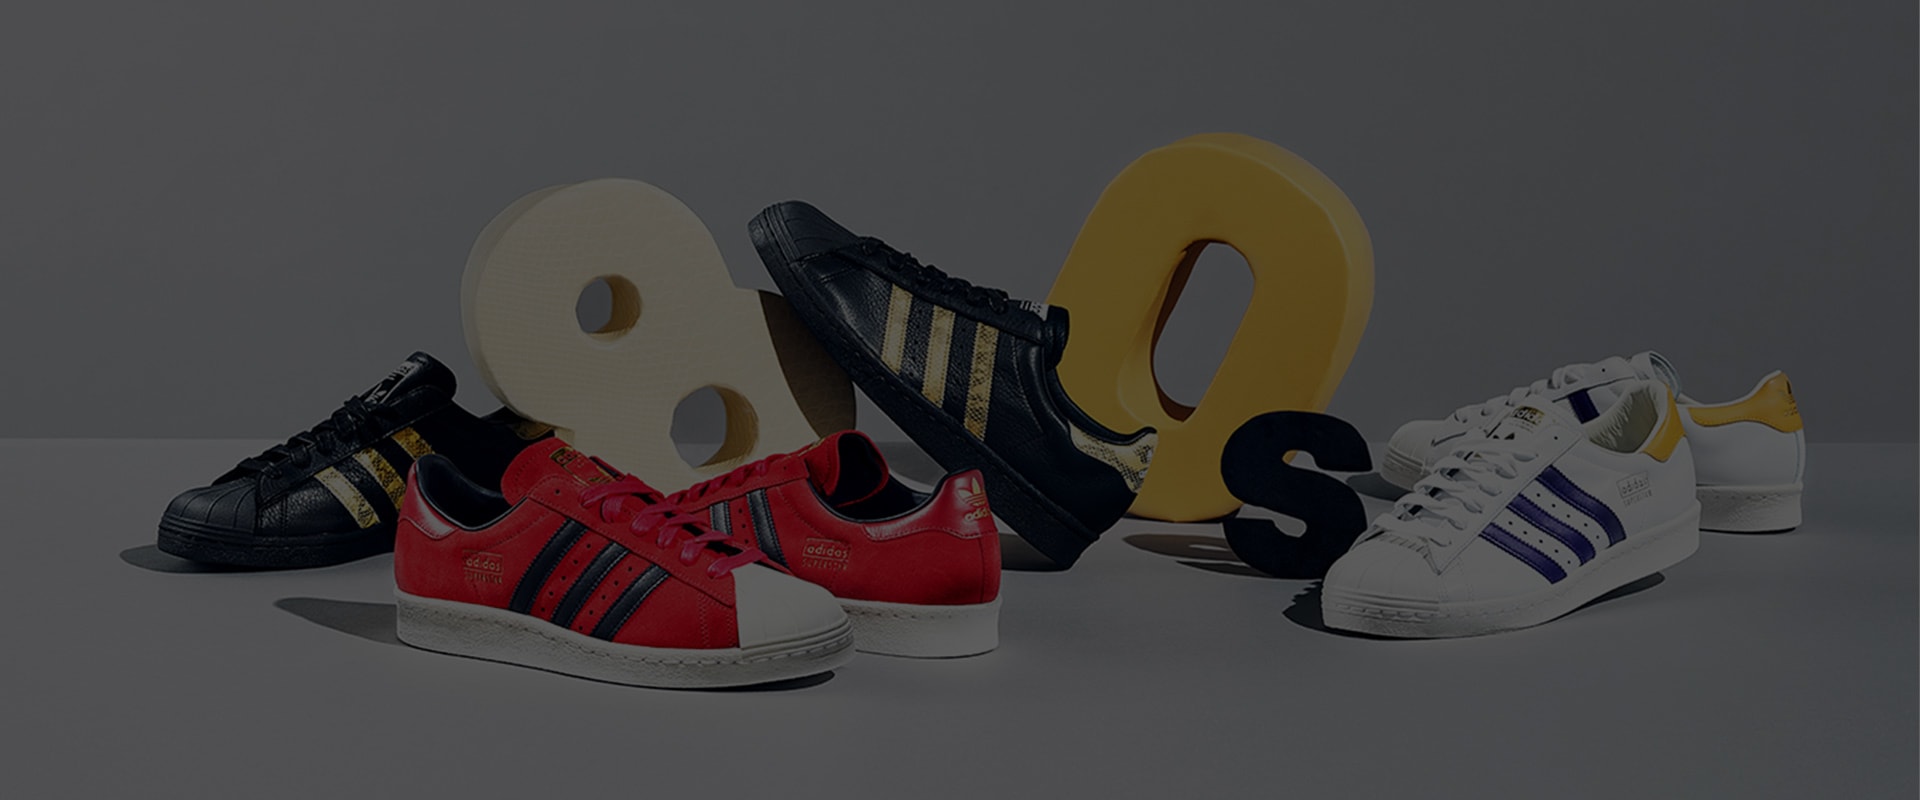 adidas design your own